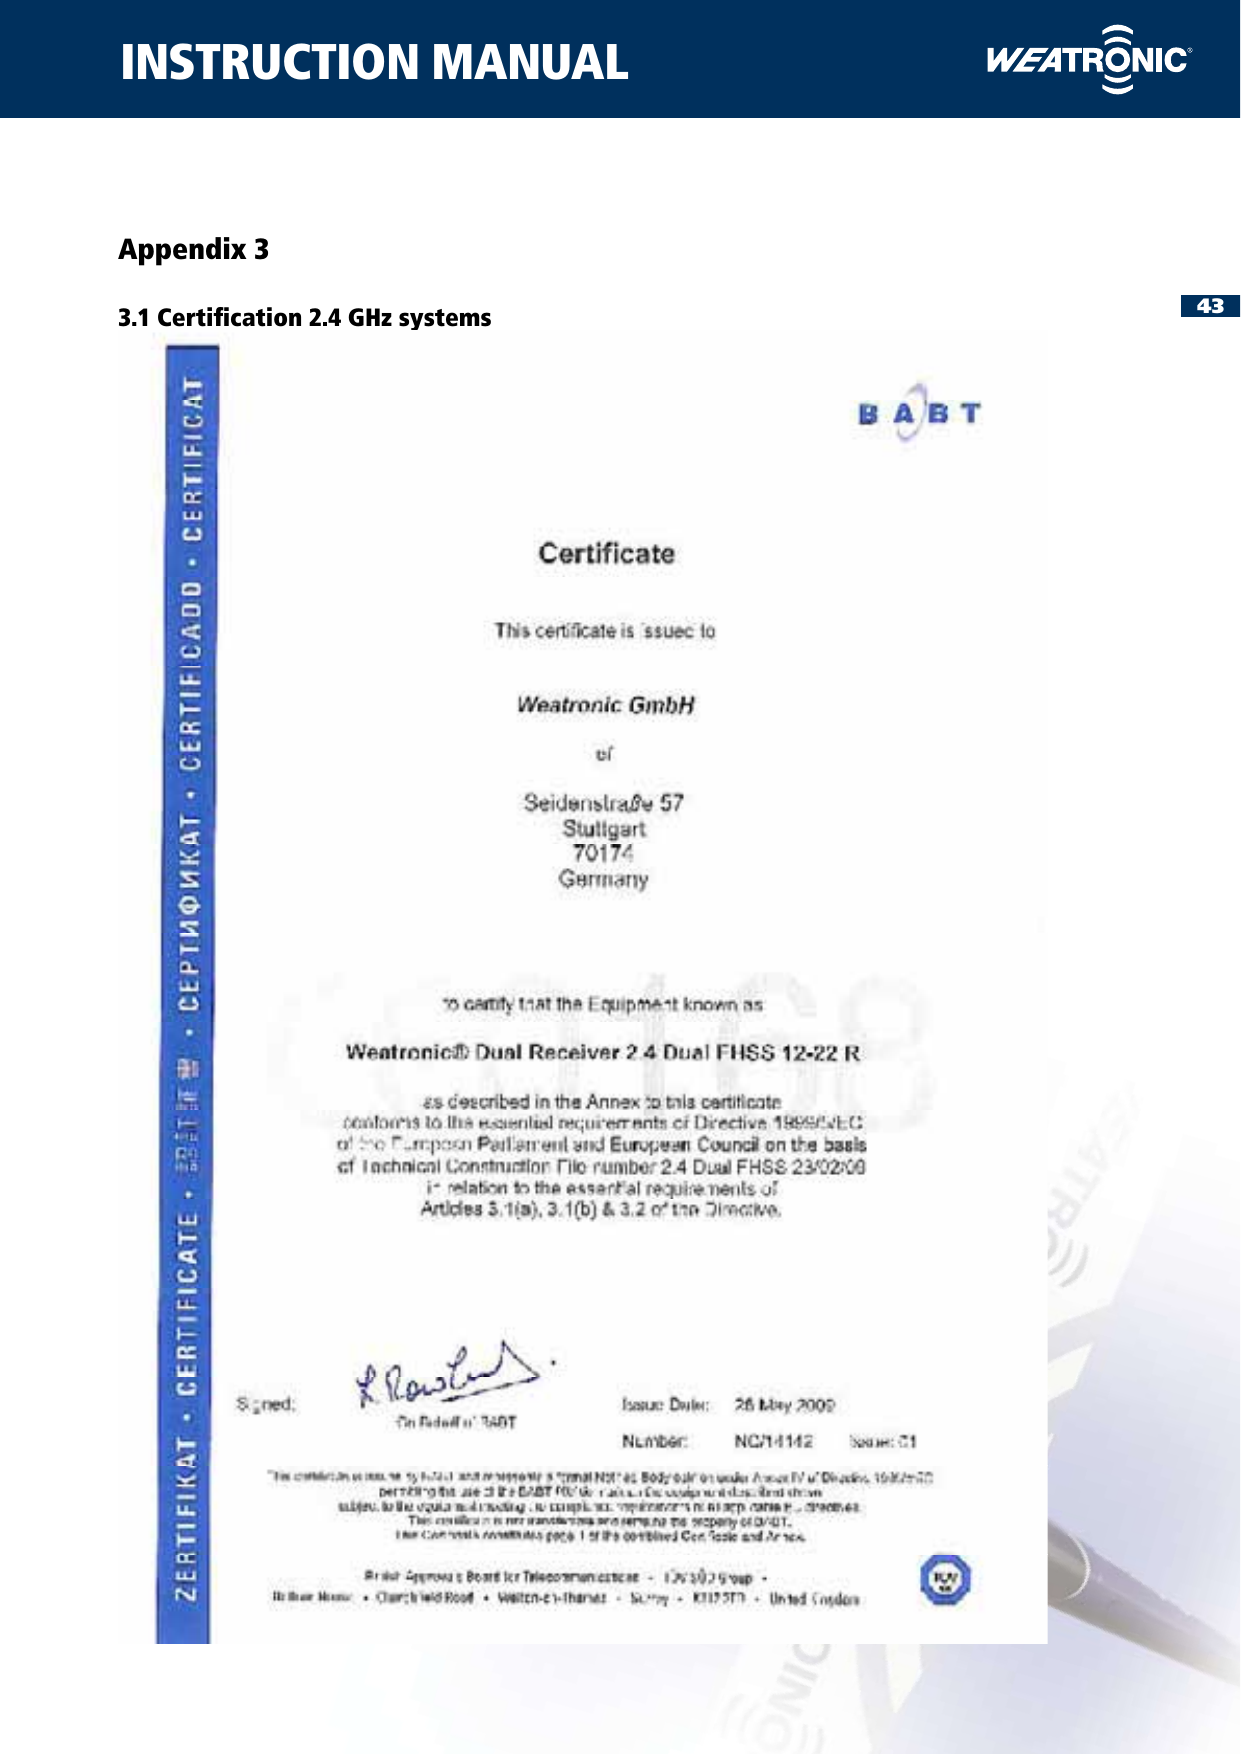 43INSTRUCTION MANUALAppendix 33.1 Certiﬁcation 2.4 GHz systems 